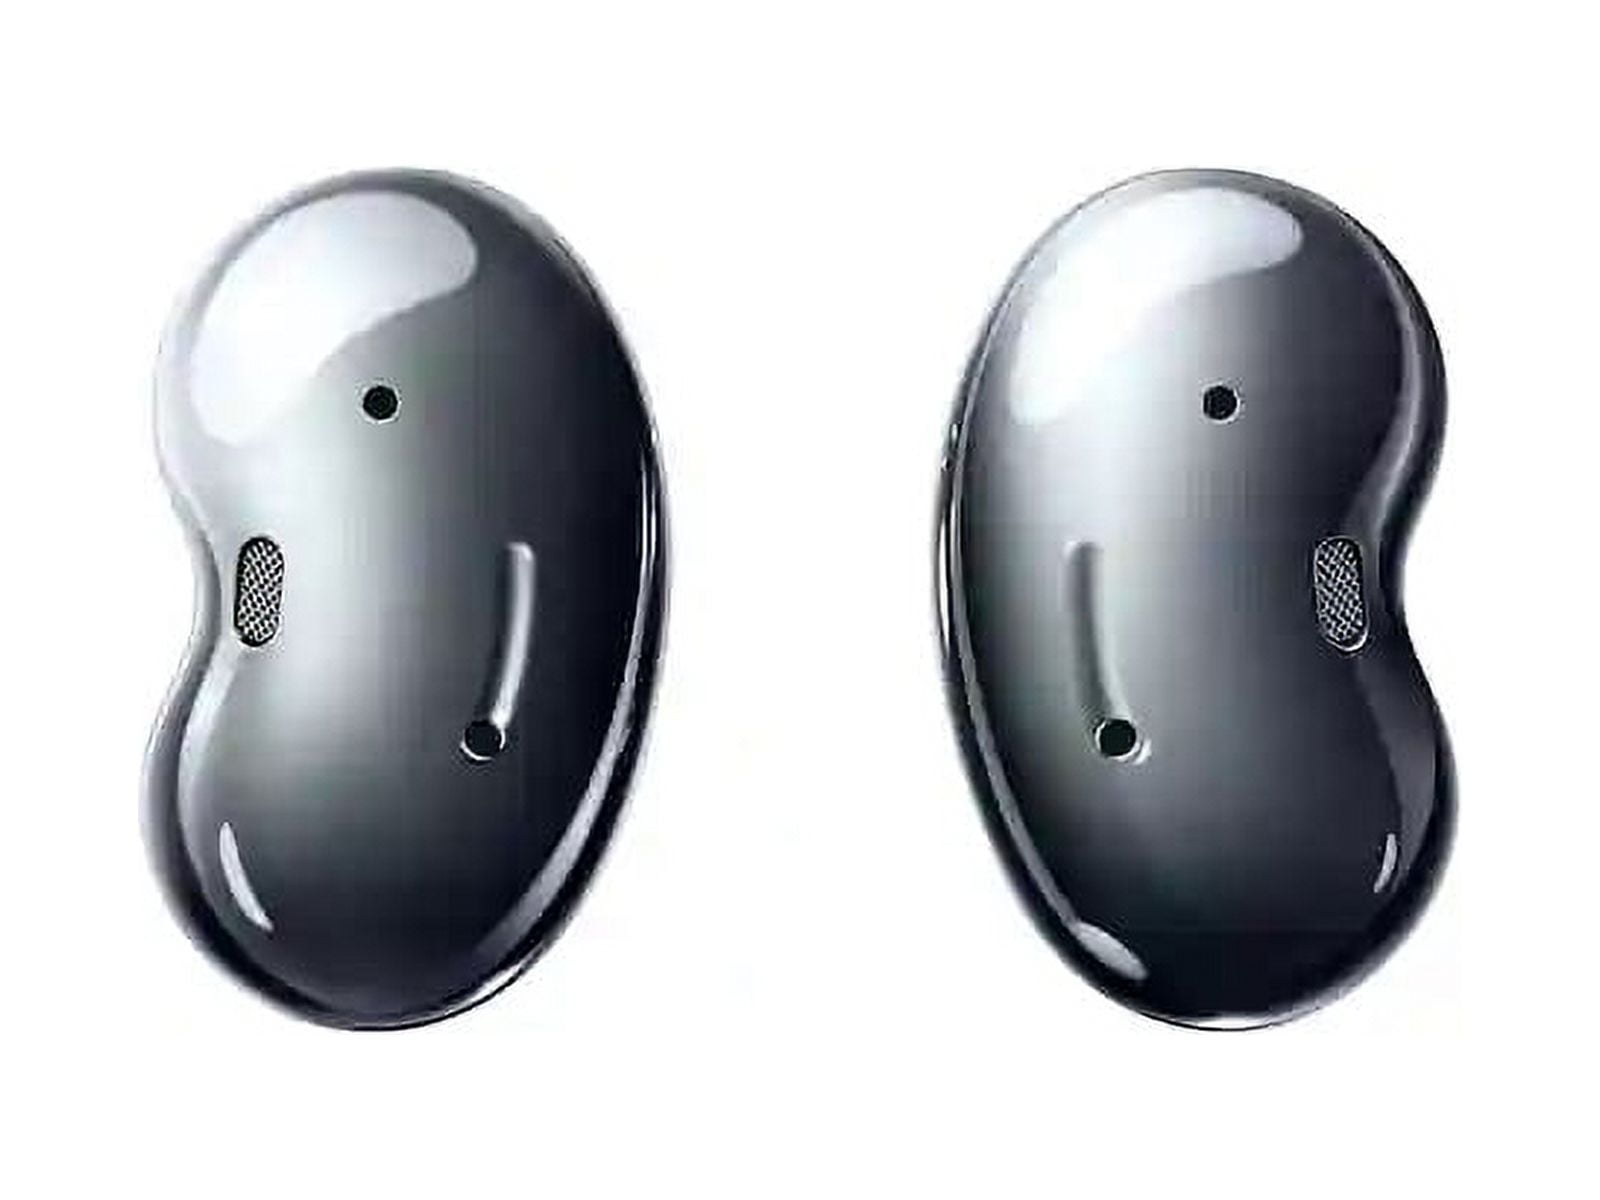 Samsung Galaxy Buds Live Wireless Earbuds with Charging Case